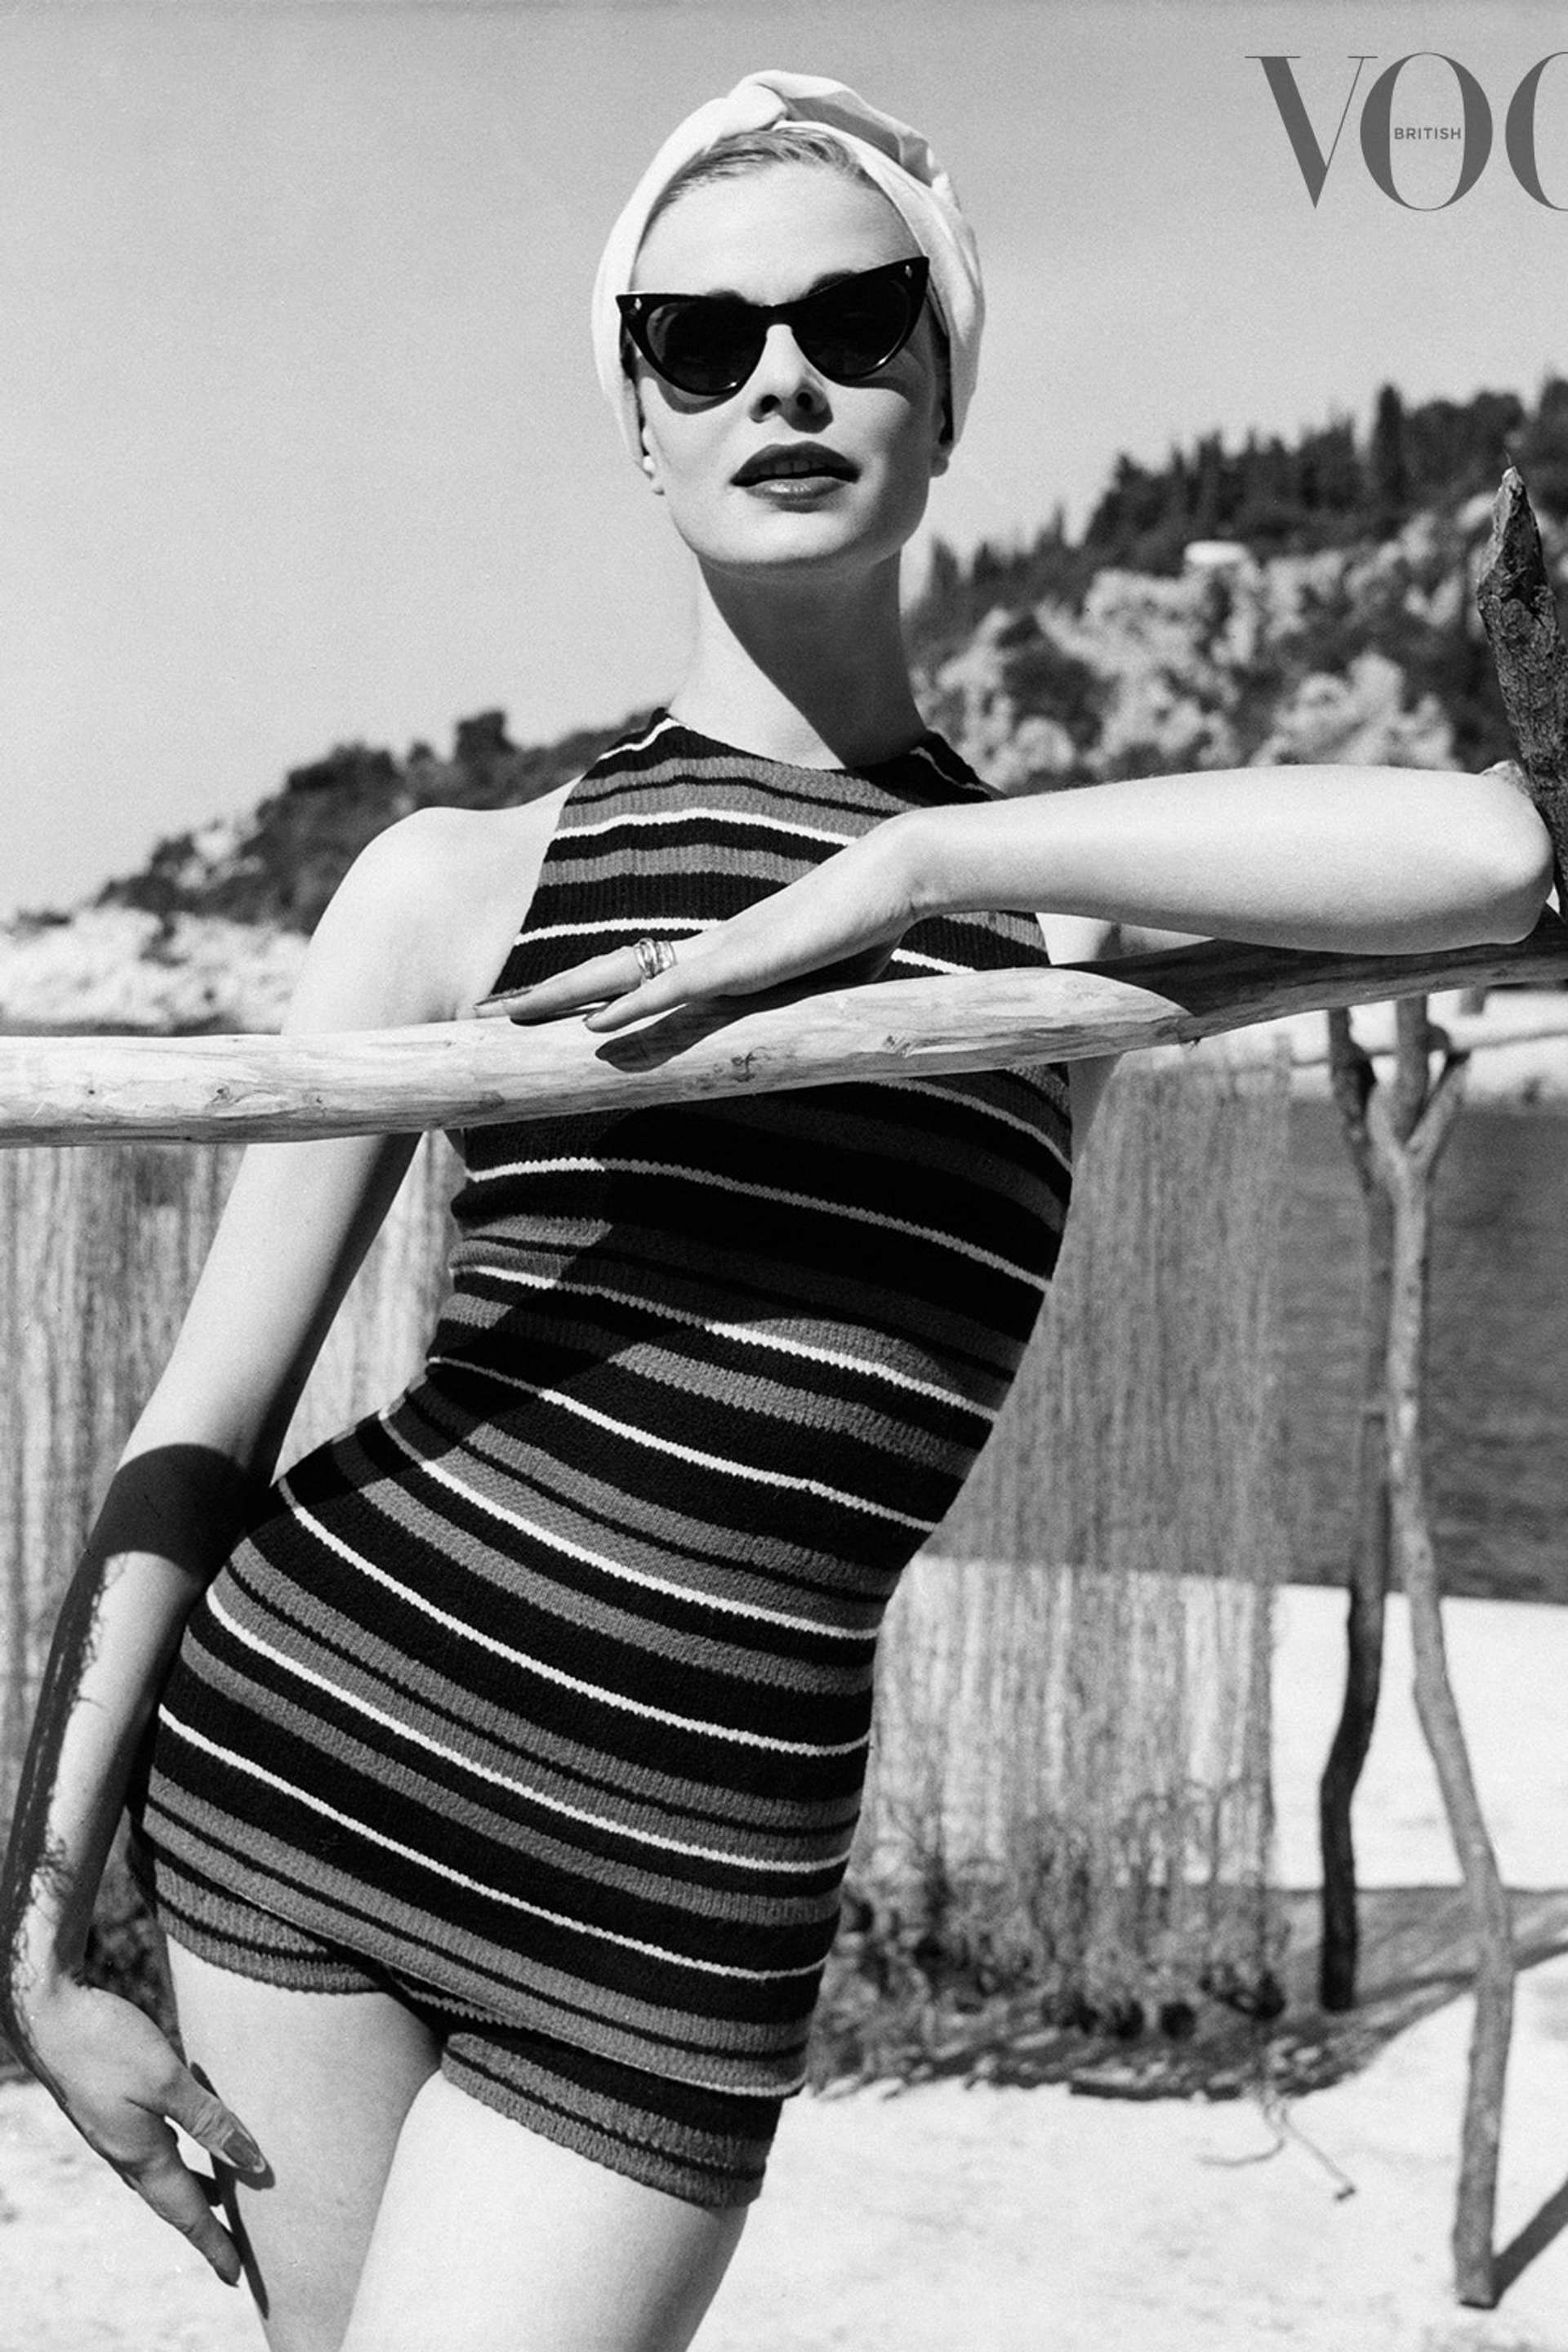 A black and white image of a model wearing a vintage-style pair of sunglasses.